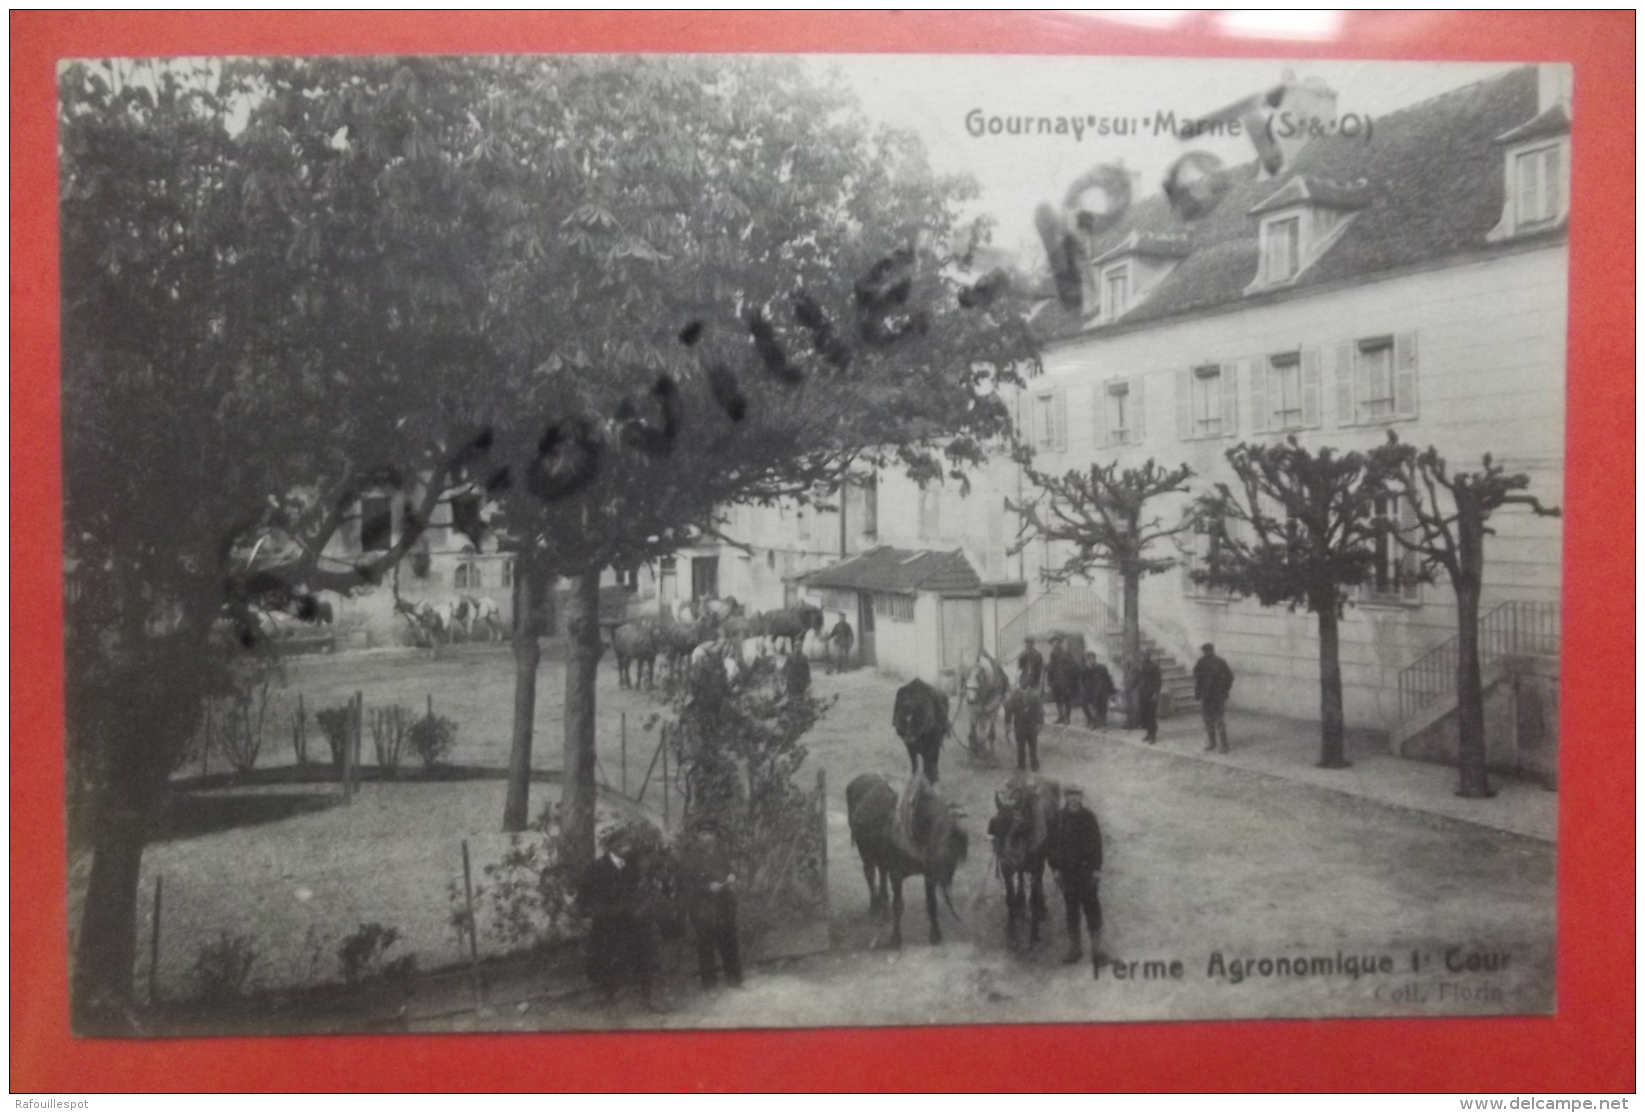 Cp Gournay Sur Marne Ferme Agronomique 1°cour - Gournay Sur Marne